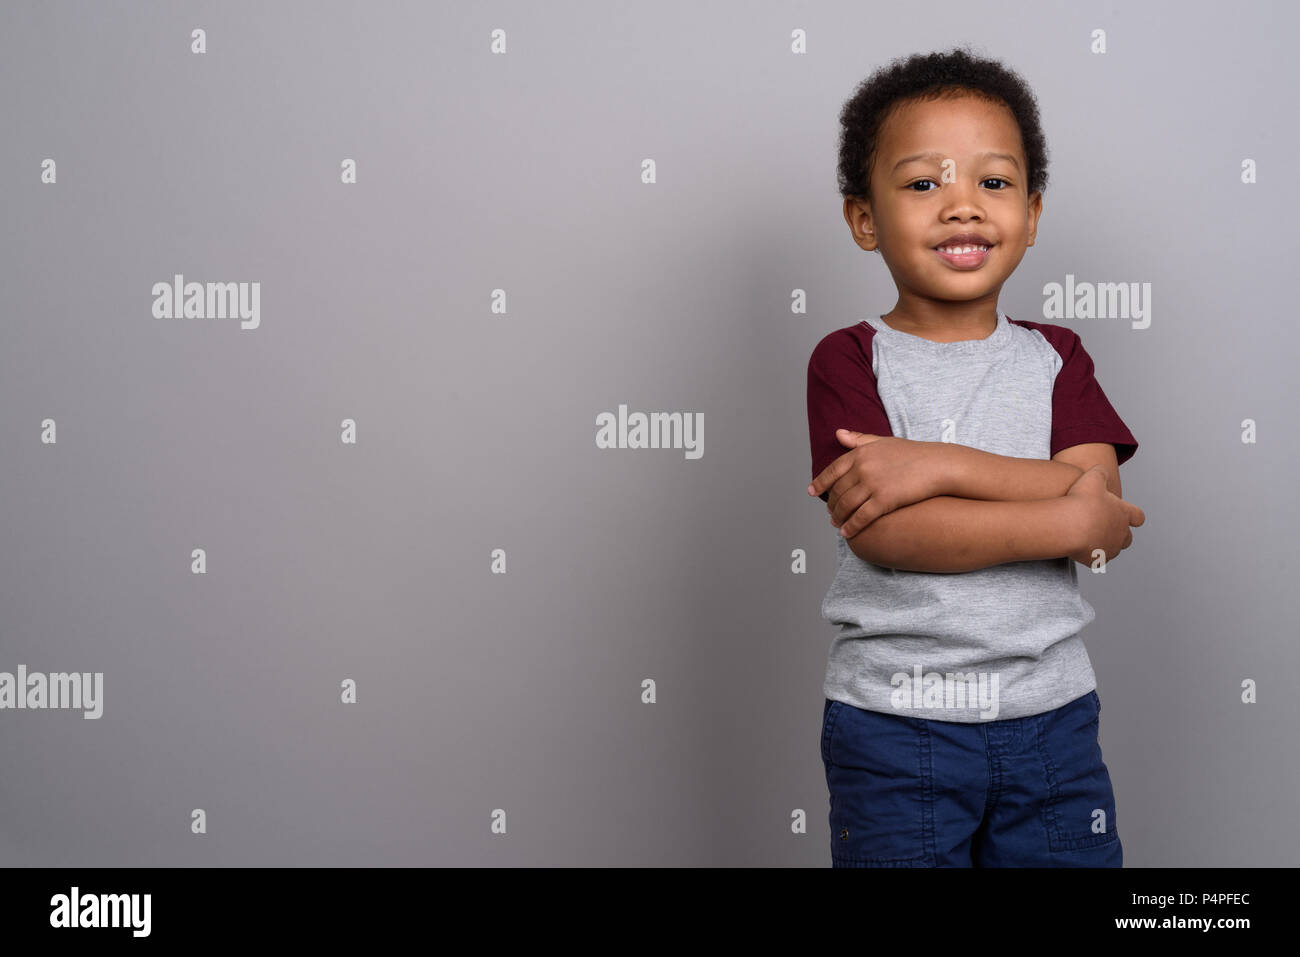 Young cute African boy against gray background Stock Photo